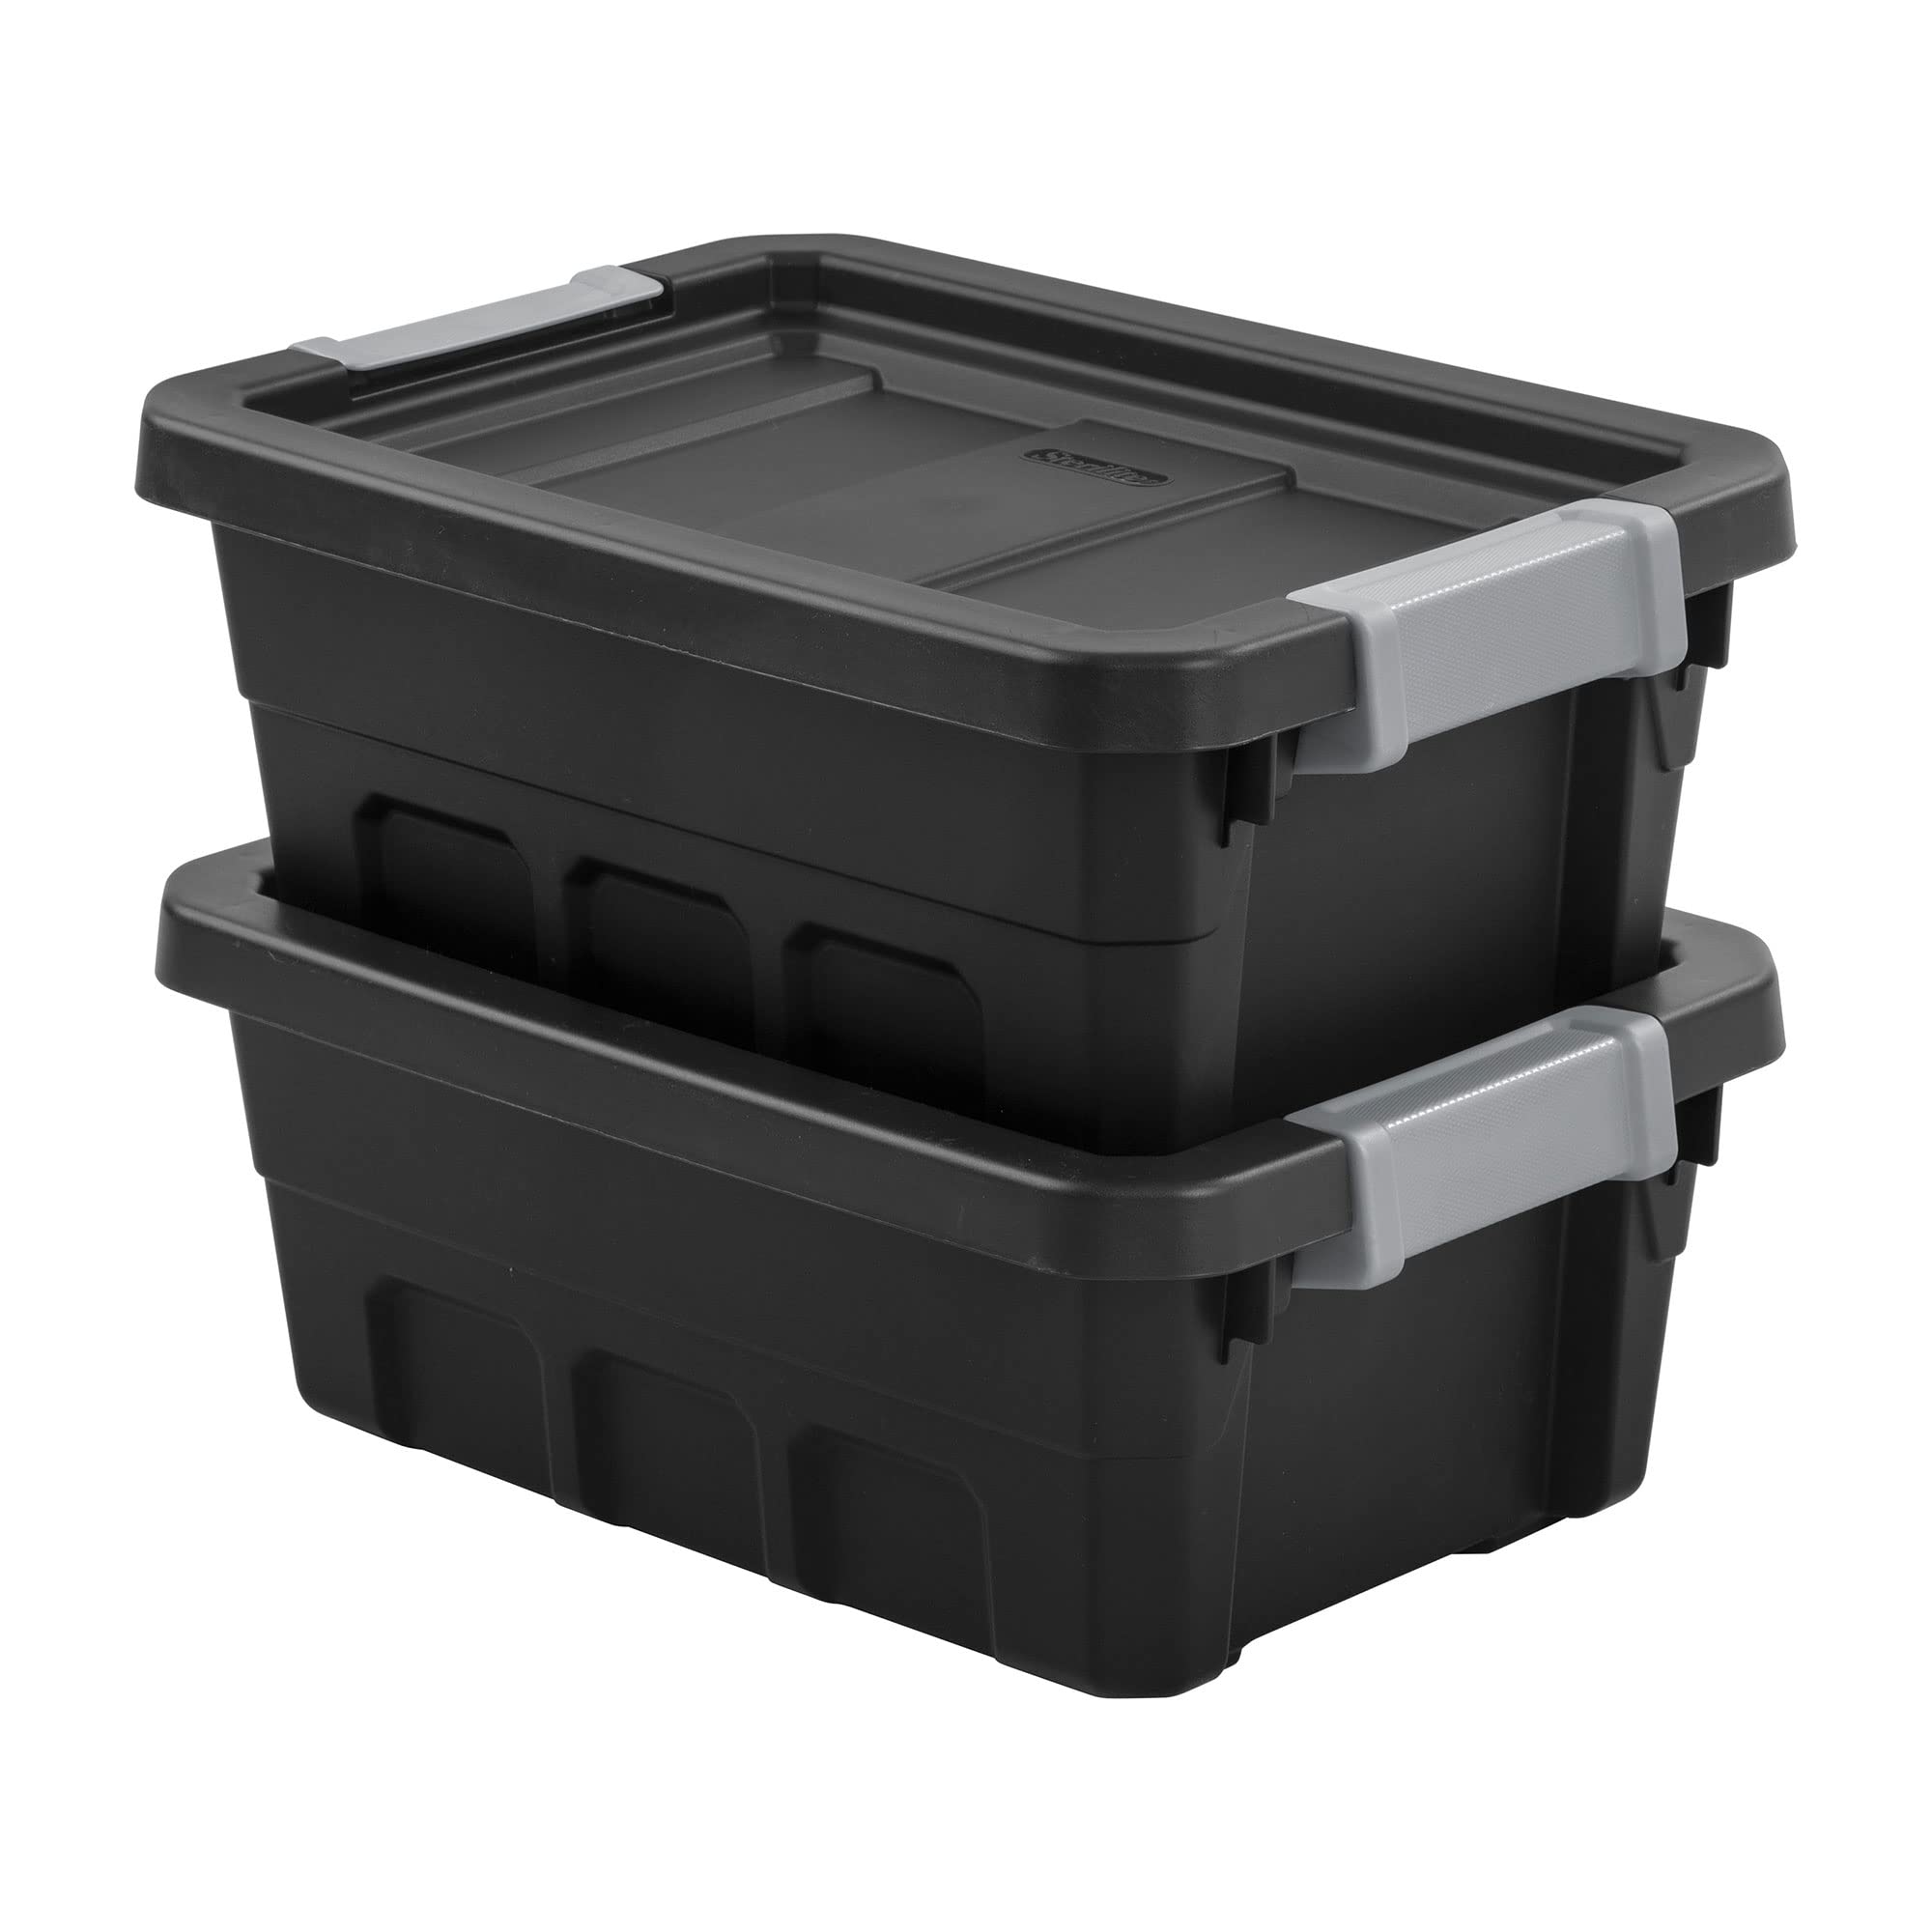 Sterilite 4 Gallon Plastic Stacker Tote, Heavy Duty Lidded Storage Bin Container for Stackable Garage and Basement Organization, Black, 6-Pack